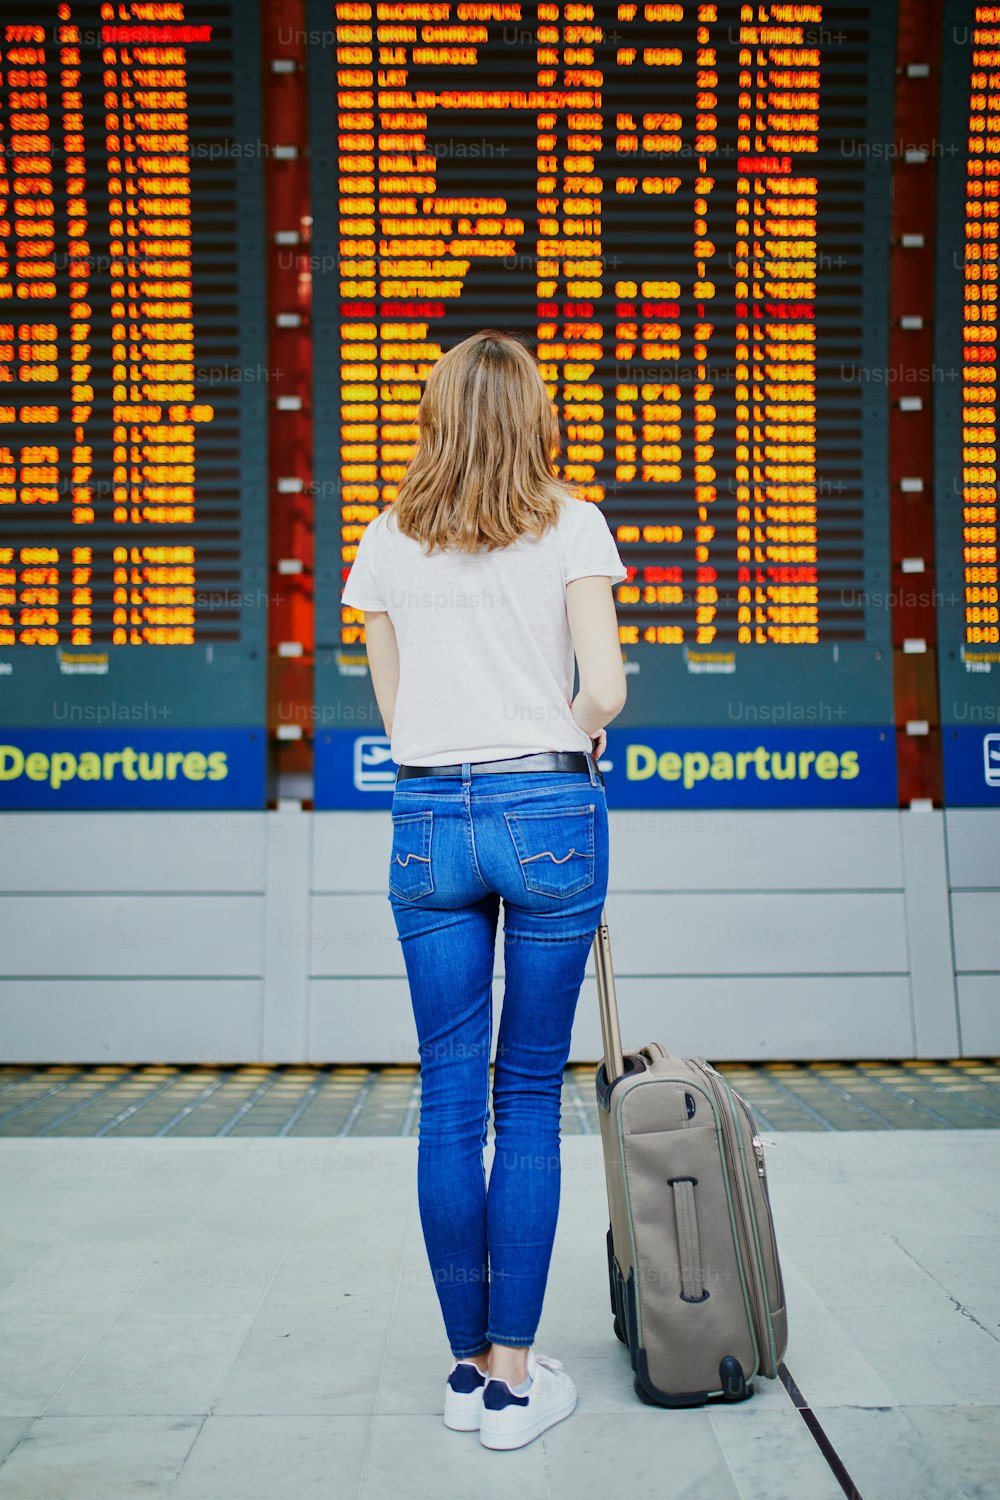 Young woman in international airport with luggage near flight information display